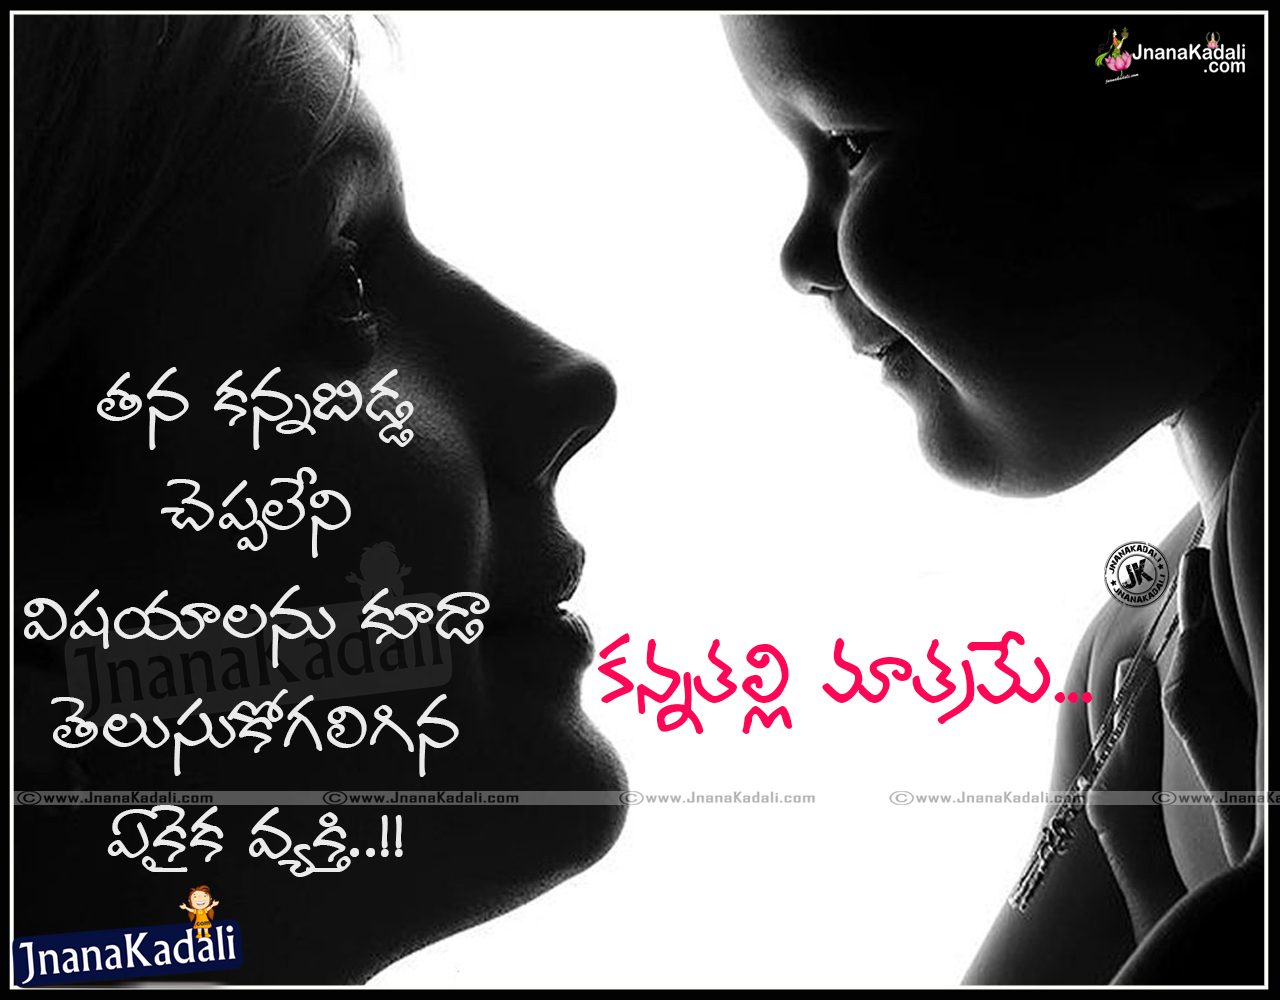 Mother S Love Quotes In Telugu With Pictures Amma Telugu Kavithalu Whats App Dp Images Free Download Mother Quotes In Telugu For Whats App Display Images Brainysms